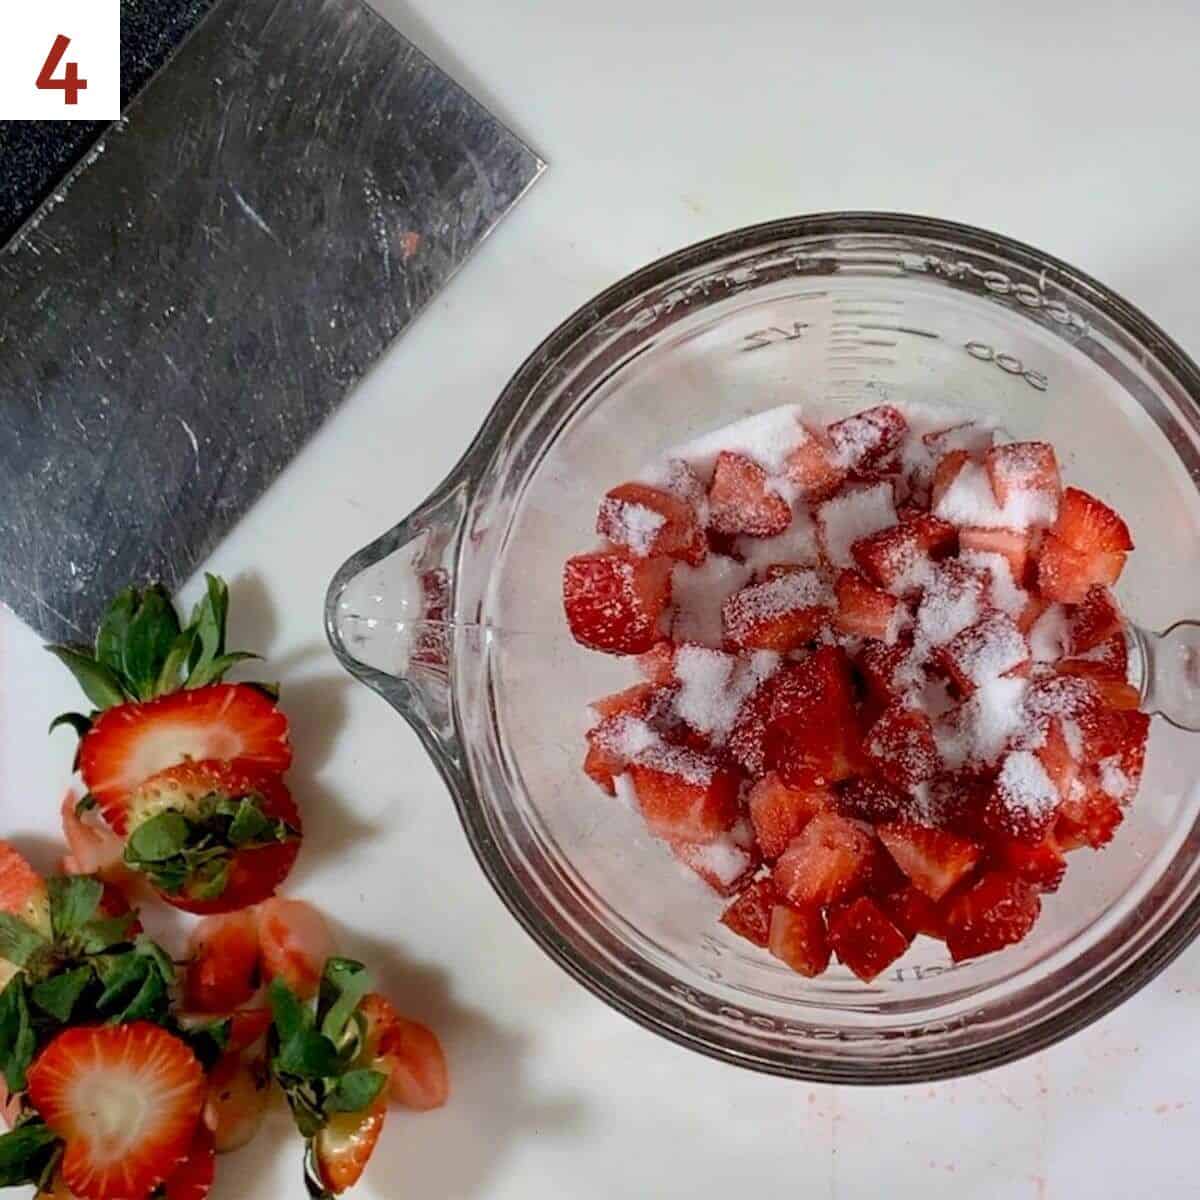 Chopped strawberries in a glass bowl sprinkled with sugar with strawberry tops and bench scraper on the side.